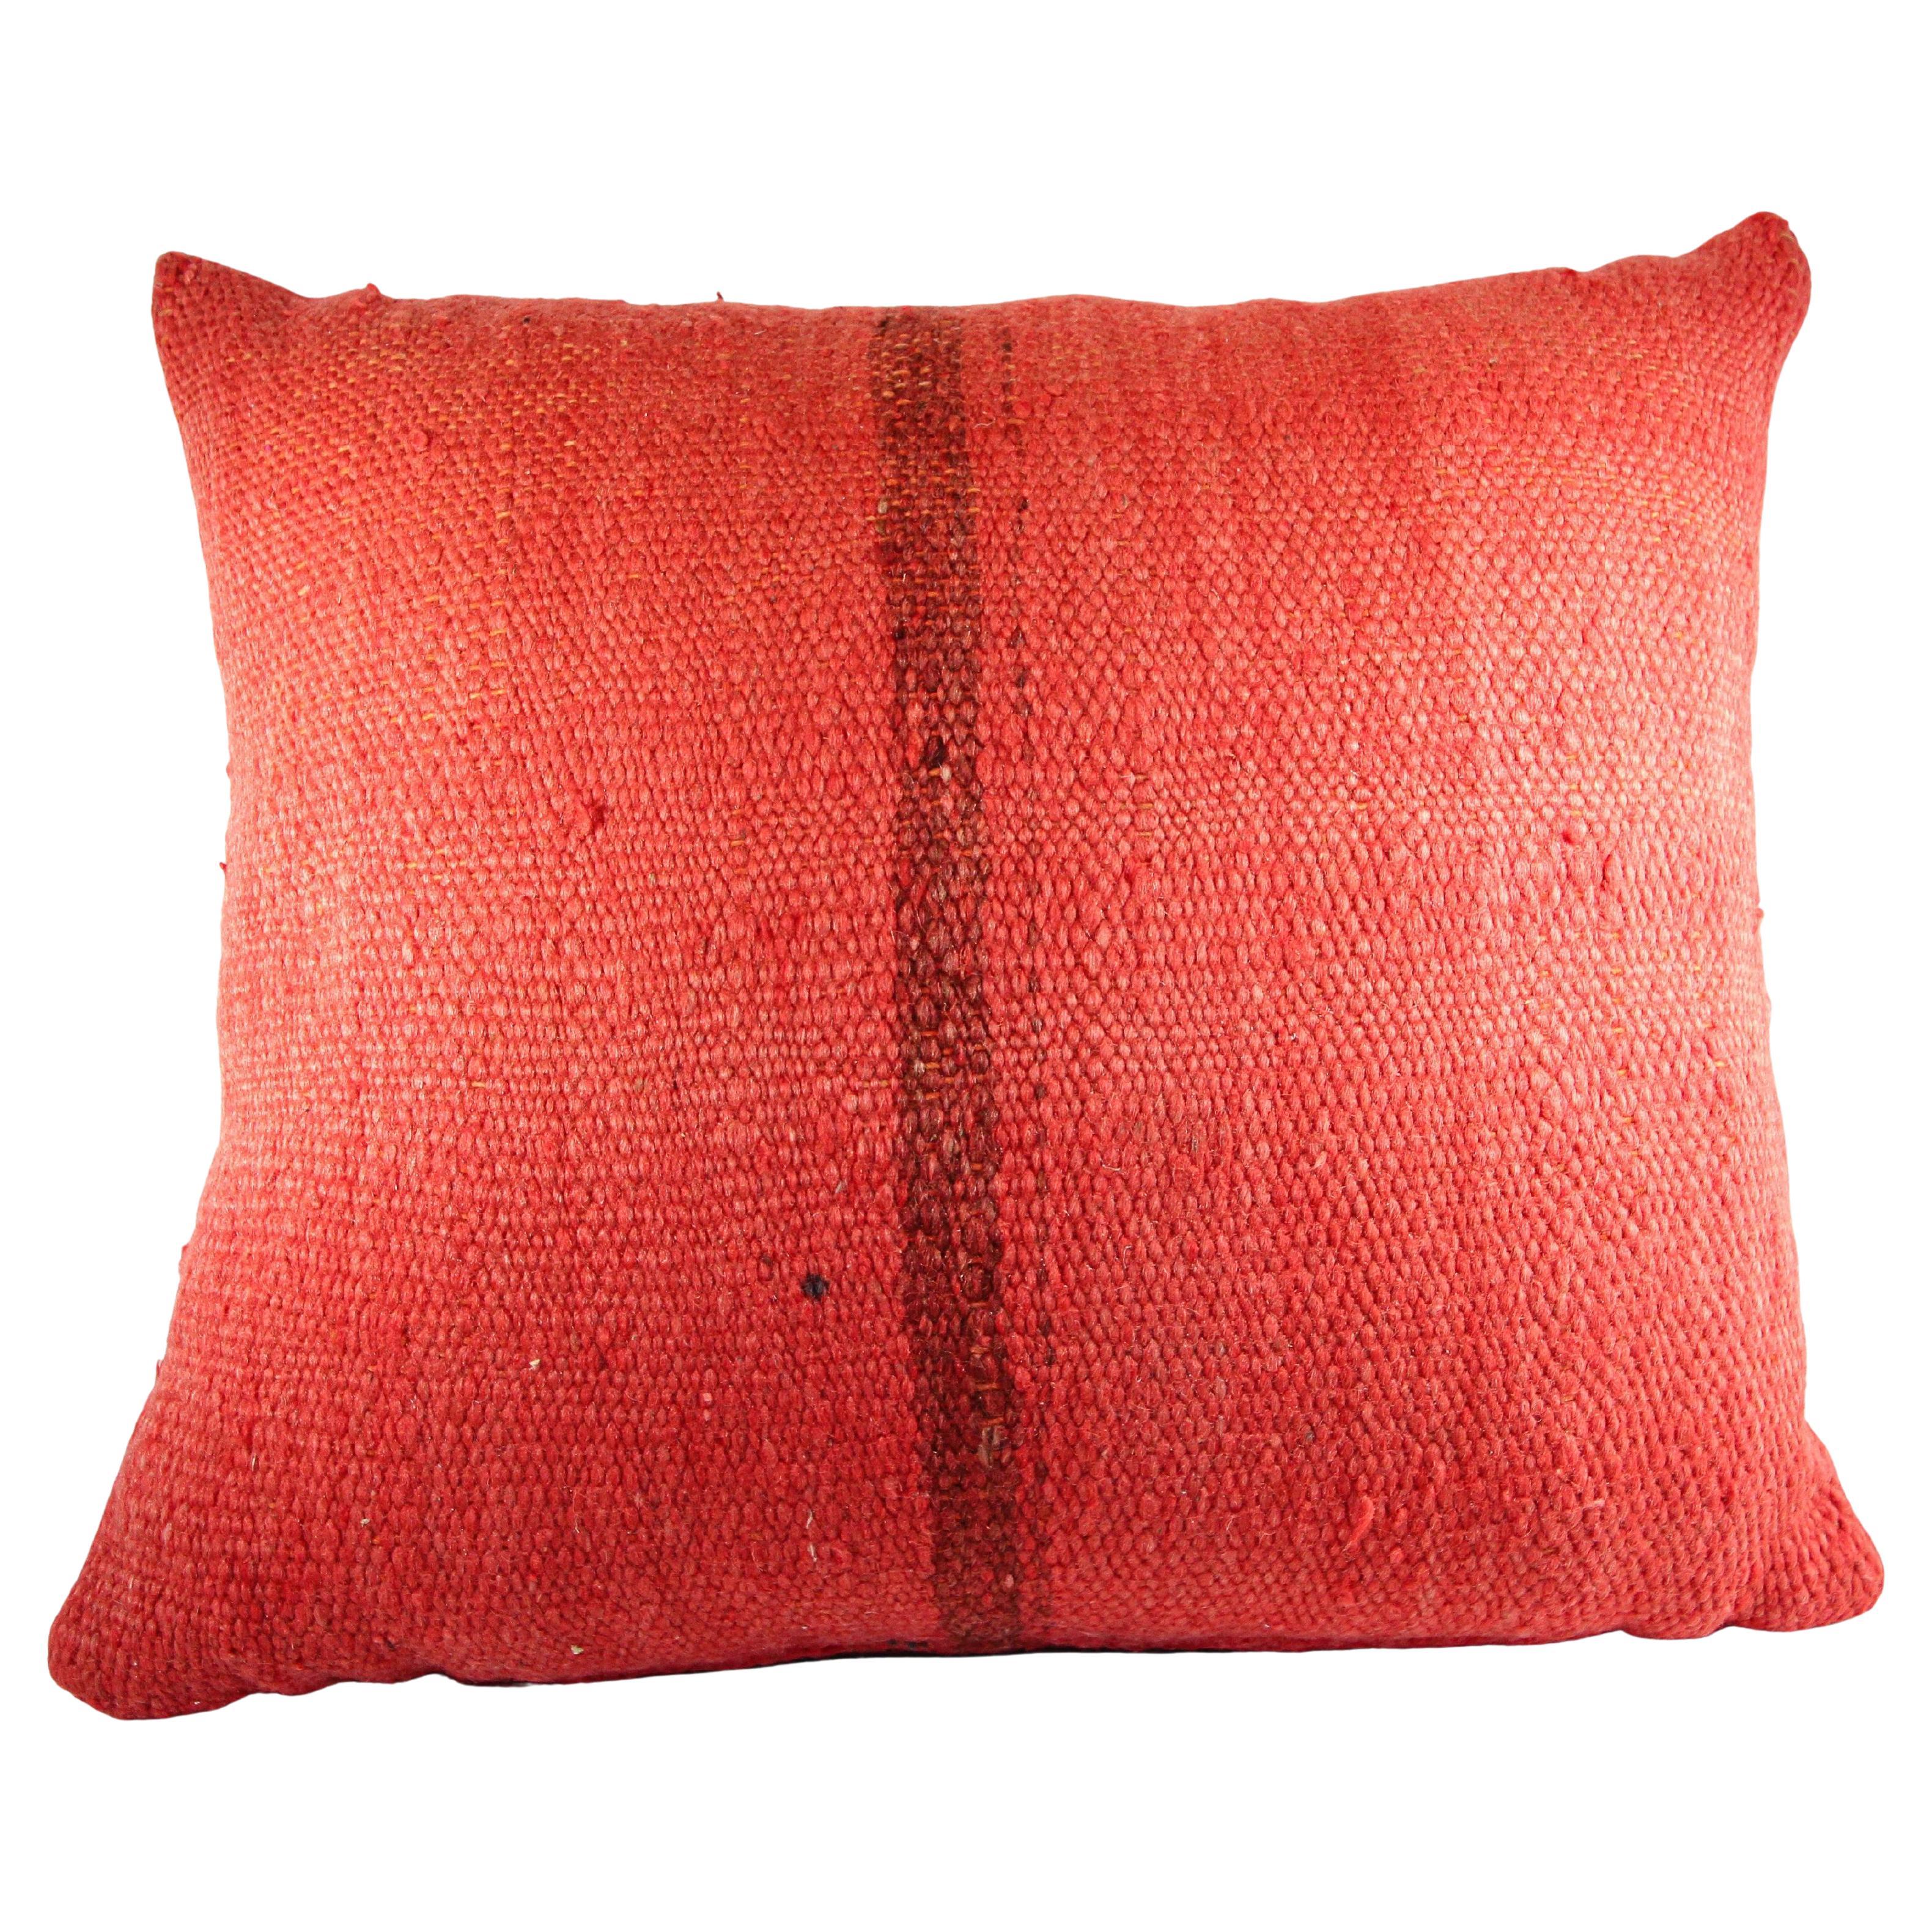 Vintage Red and Black Berber Moroccan Pillow